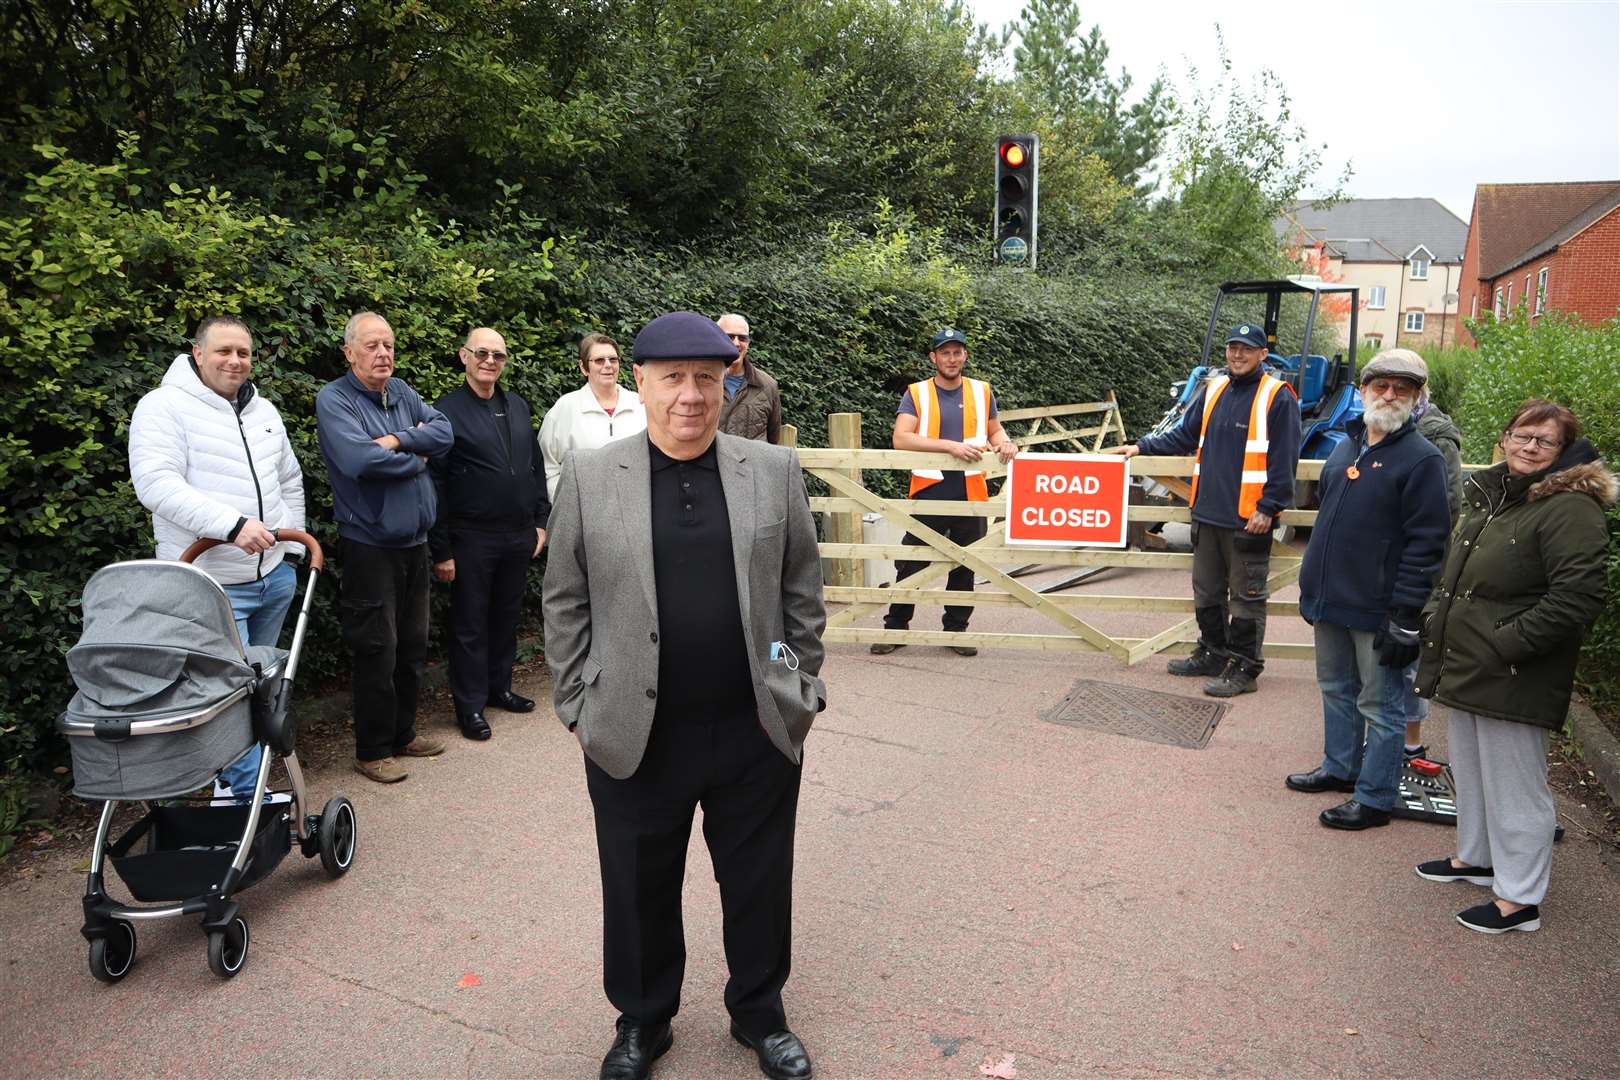 Cllr James Hall and residents when the gates were installed